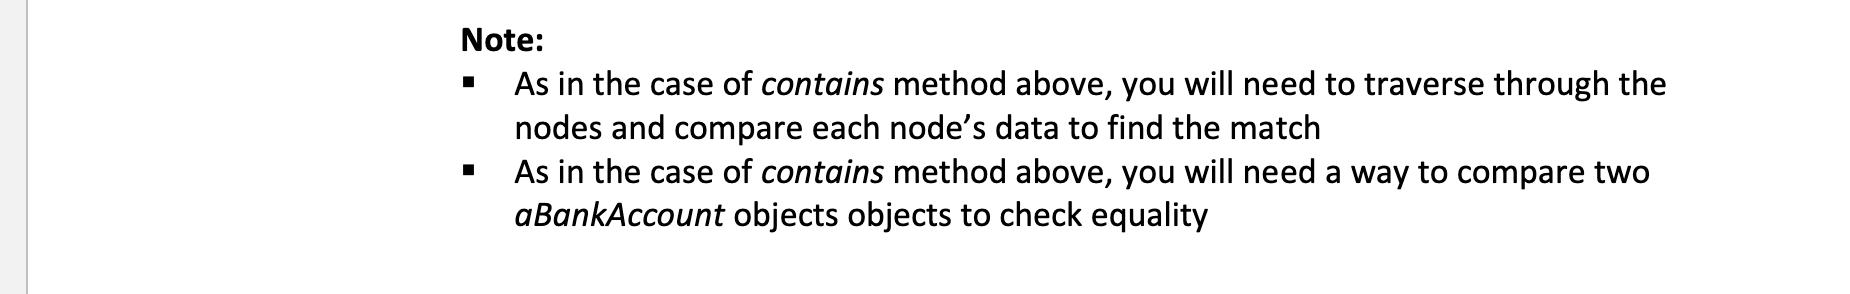 Note: As in the case of contains method above, you will need to traverse through the nodes and compare each